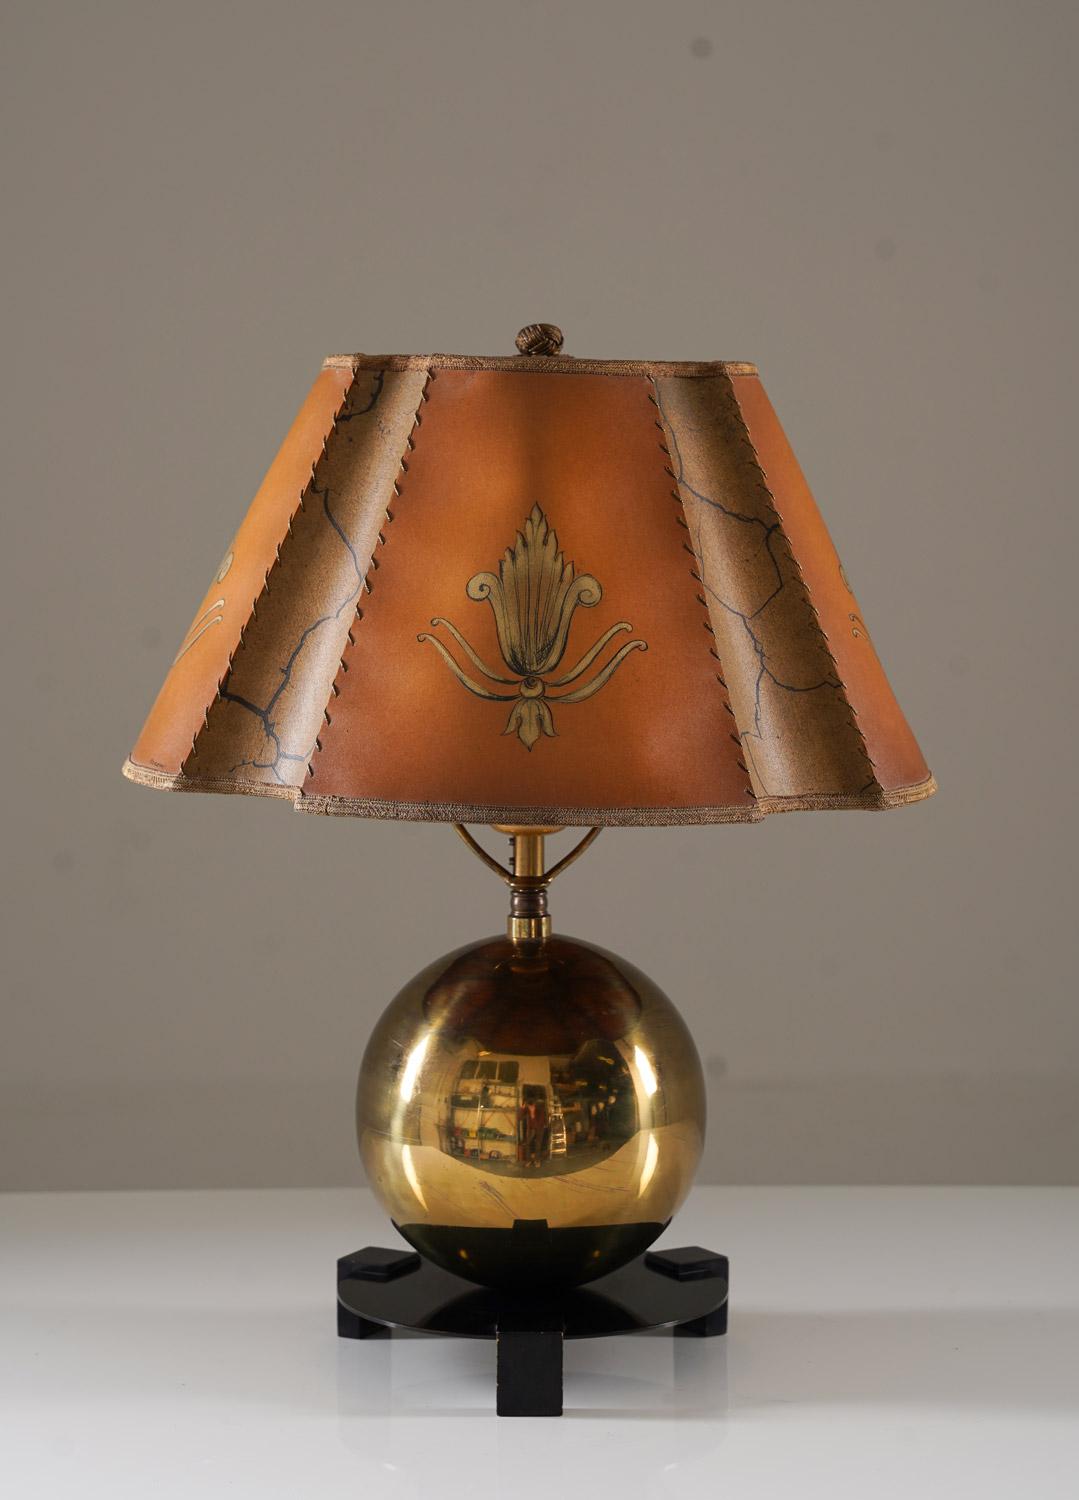 Charming art deco table lamp manufactured by Corona, Sweden, 1930s.
The lamp consists of a large brass sphere with a round black base. The original shade is made of paper with beautiful handpainted ornaments. 

Condition: Very good condition. The